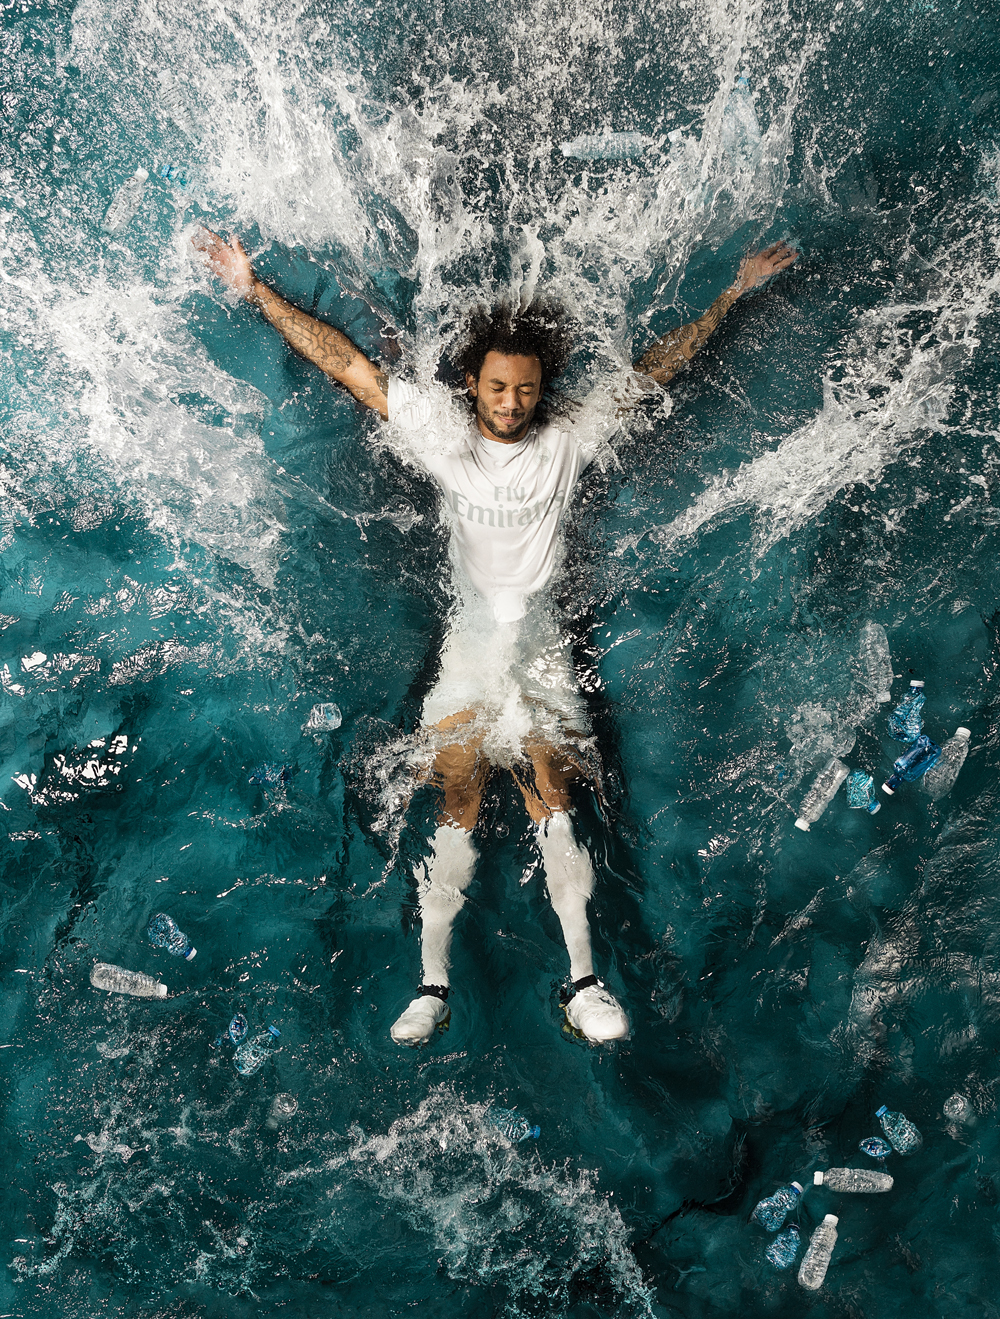 adidas-unveils-first-performance-apparel-and-footwear-collection-made-of-recycled-ocean-plastic-4